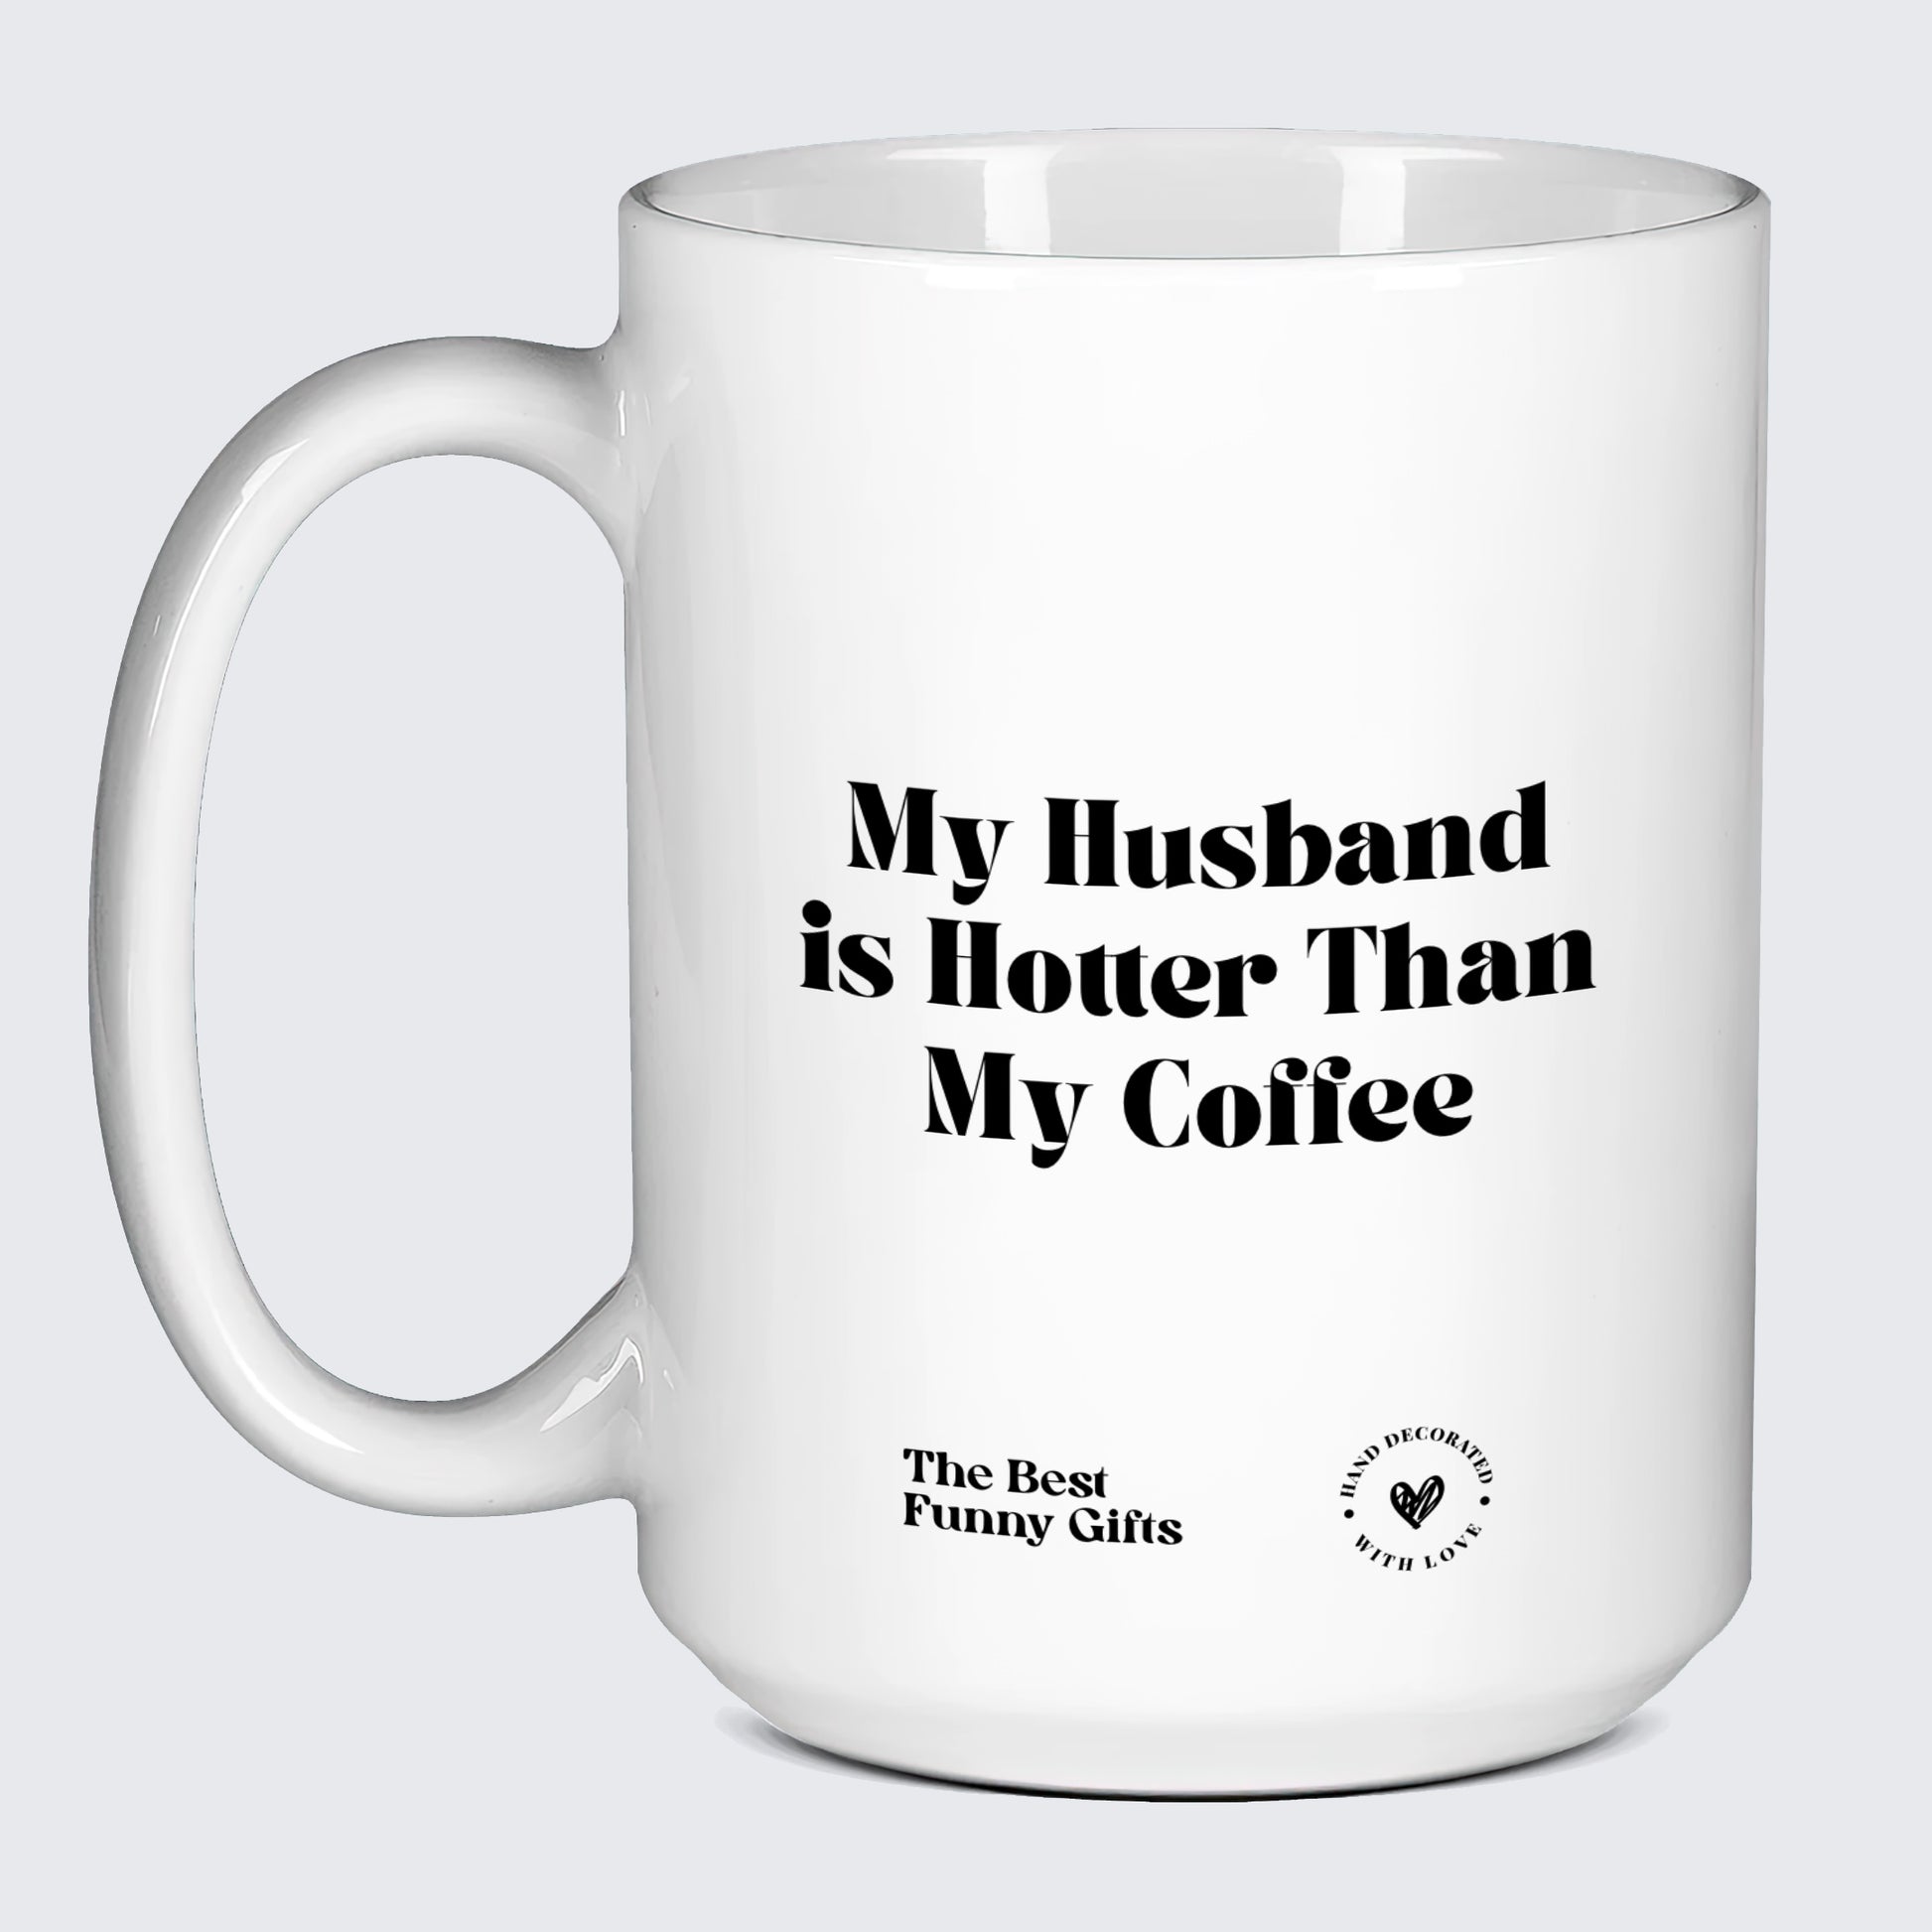 Cute Mugs My Husband is Hotter Than My Coffee - The Best Funny Gifts